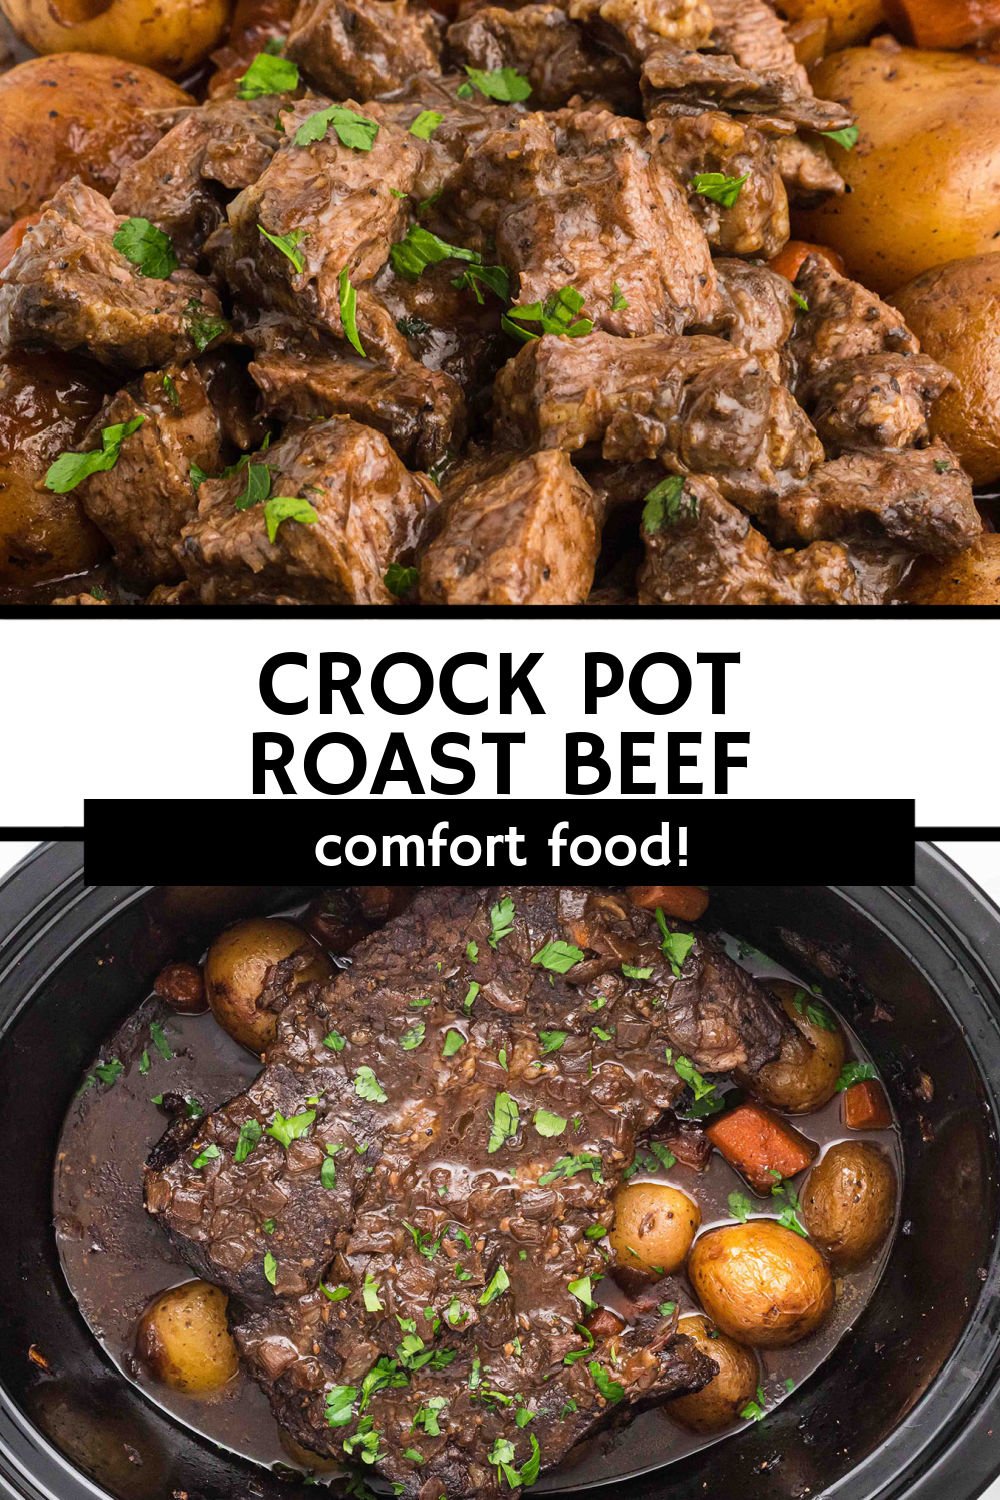 Slow Cooker Roast Beef is tender, juicy and full of flavor. This easy recipe will turn non-roast beef lovers into raving fans once they’ve tried this delicious pot roast! It is the ultimate comfort food that the entire family will love. | www.persnicketyplates.com